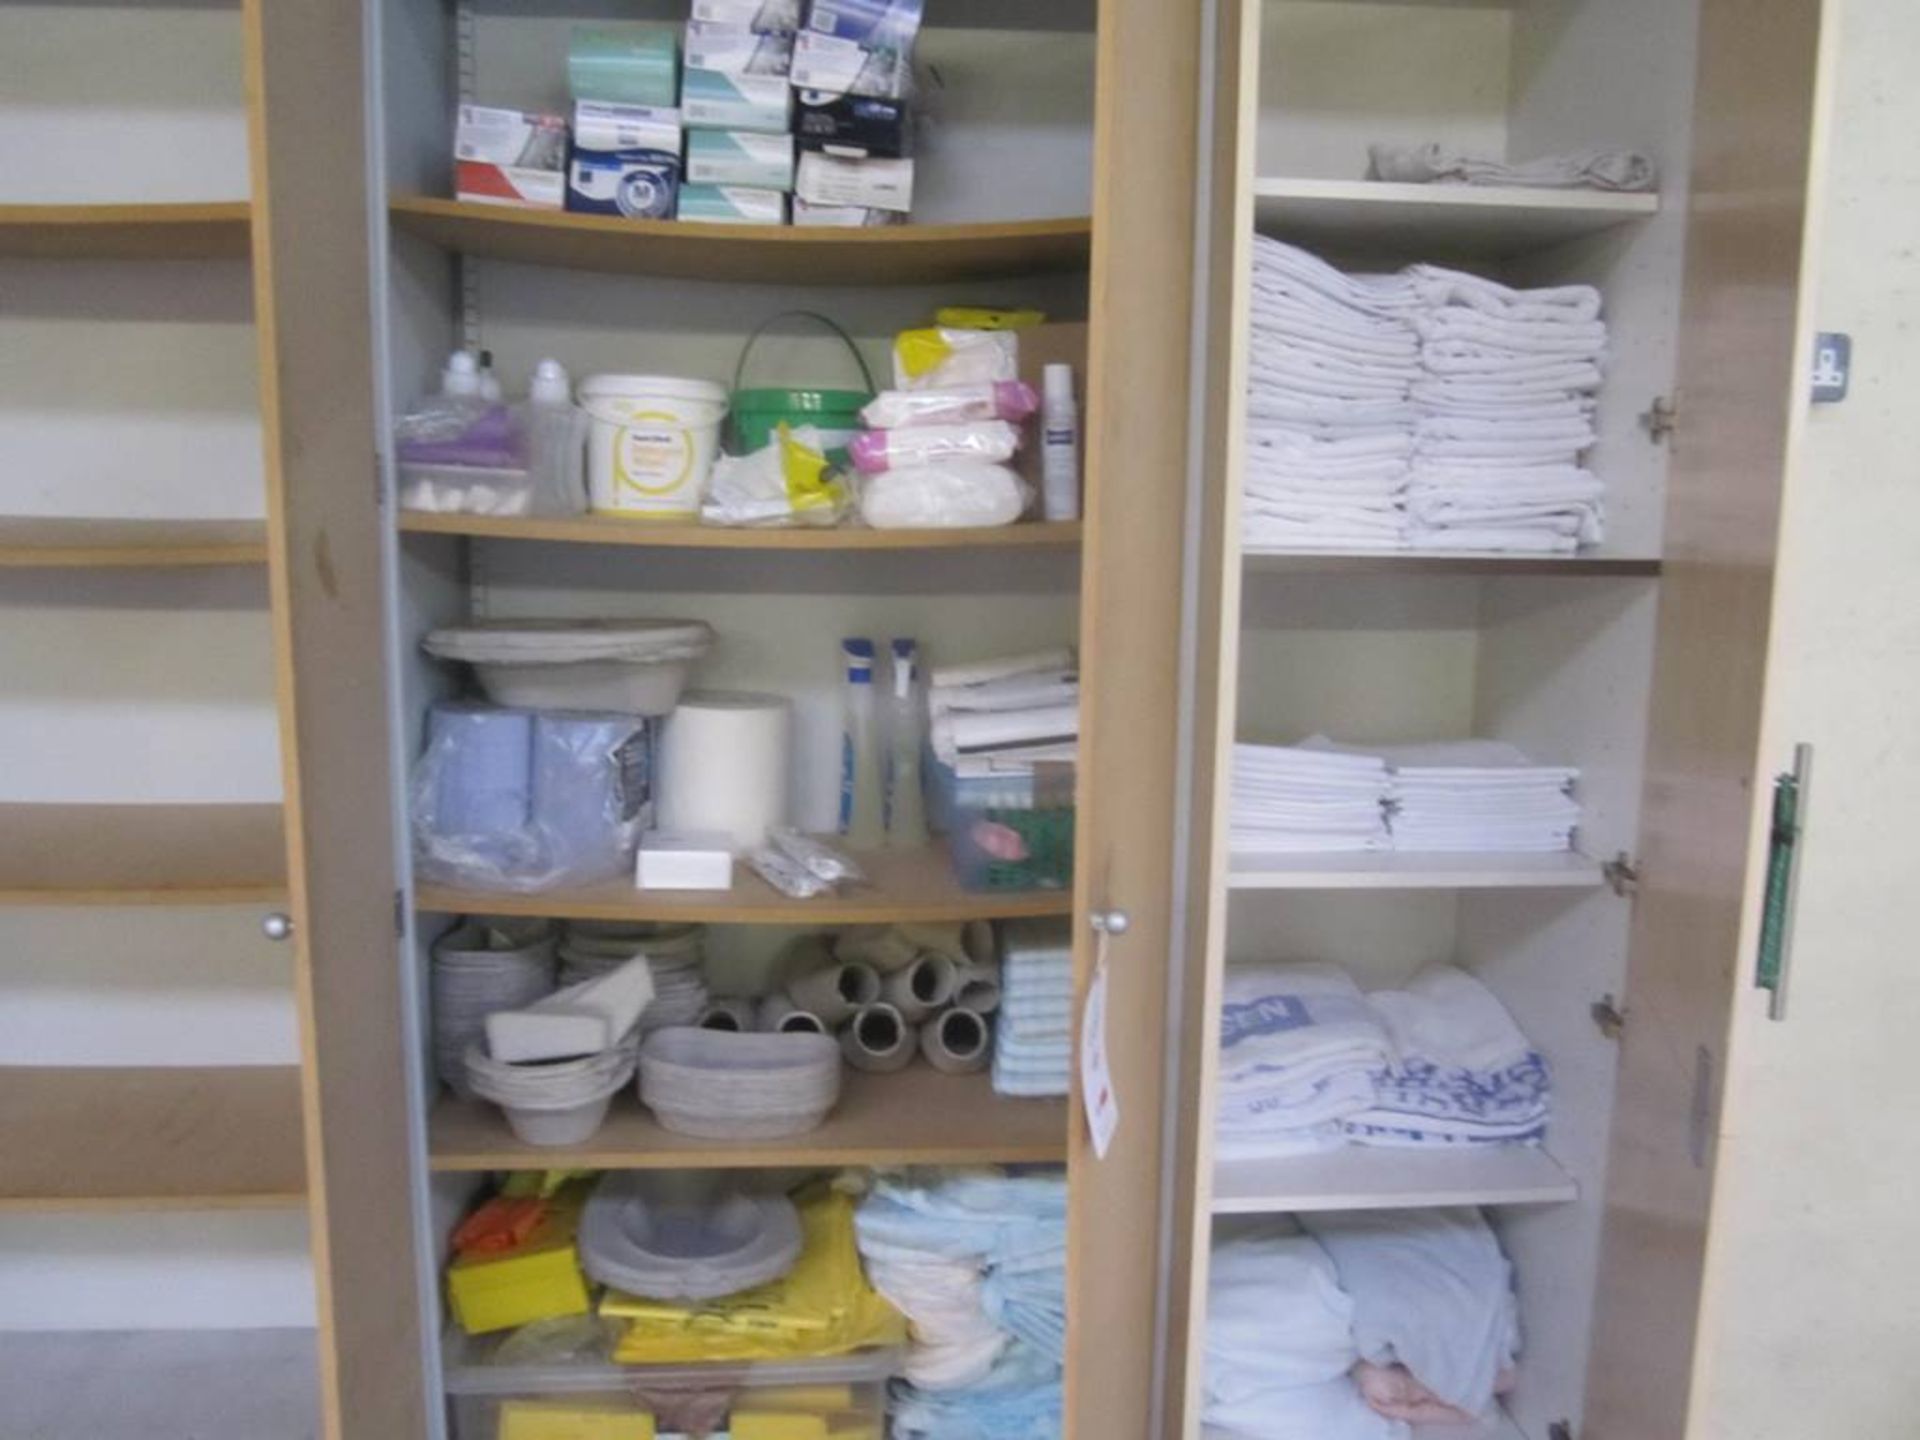 Loose contents of two cupboards, including linen (sheets, towels), consumable stock, etc.